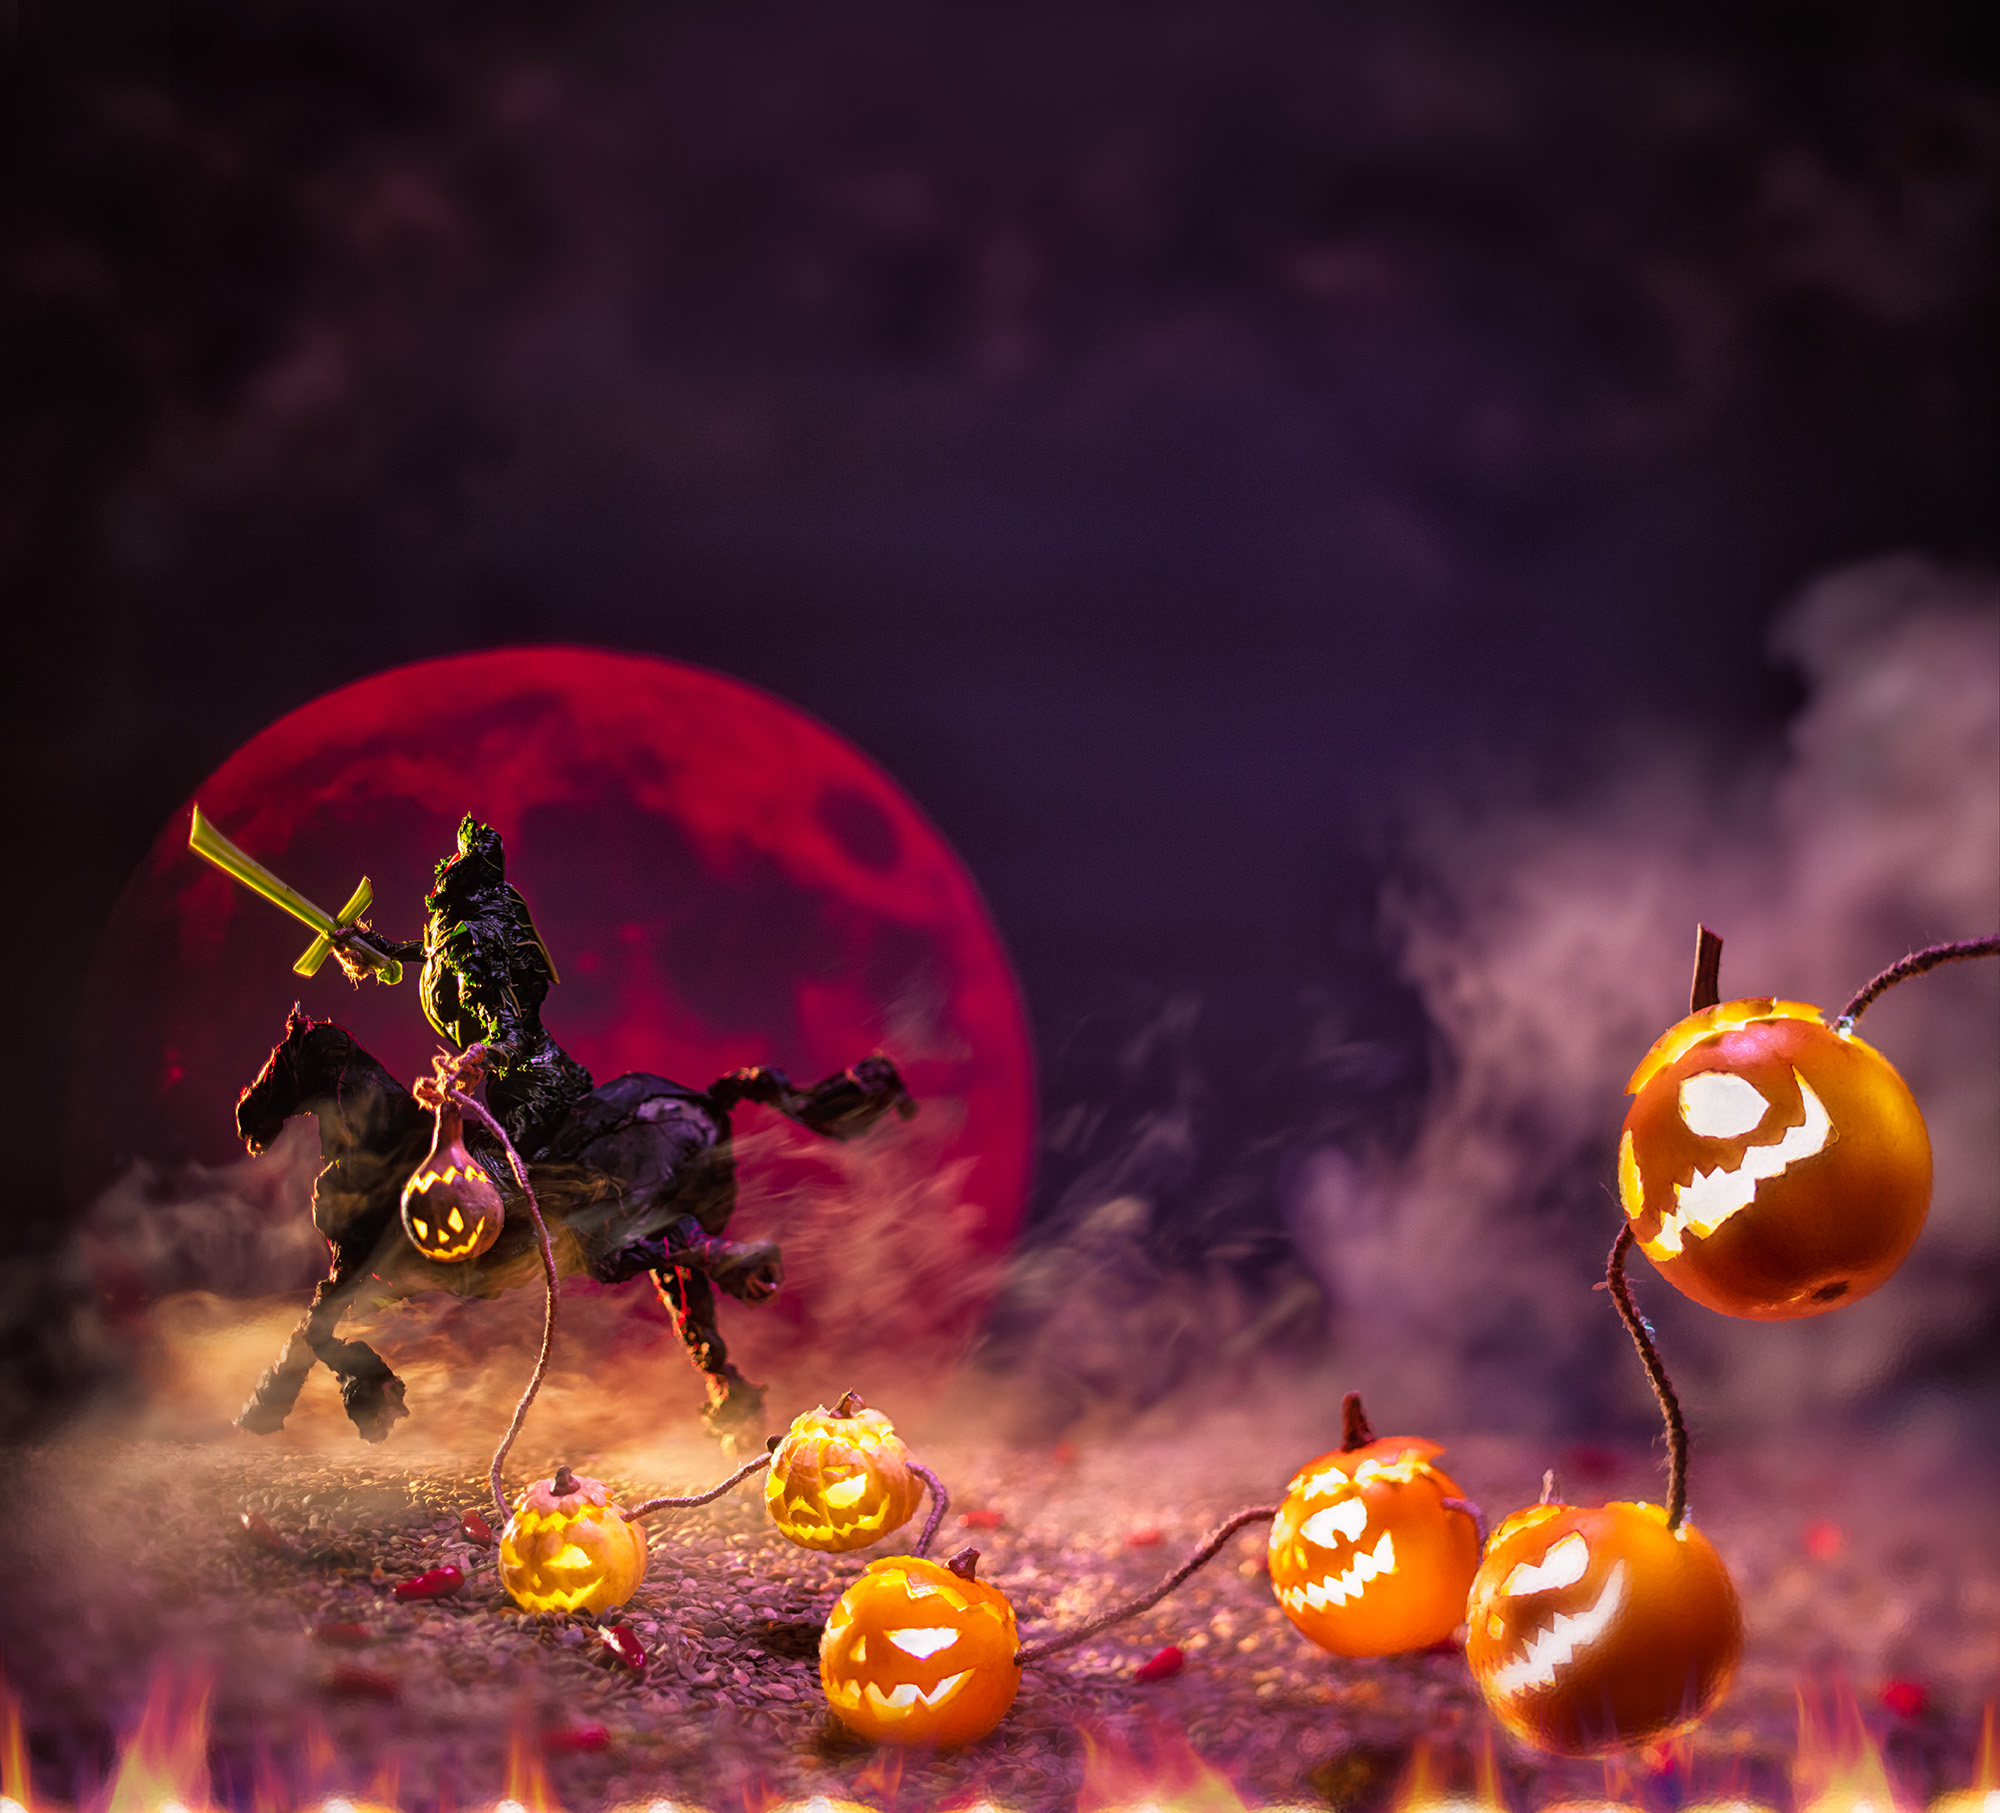 A headless rider made out of kale holding a sword in one hand several pumpkins with carved out faces on a rope in the other hand, is sitting on a horse which is also made out of kale, a red full moon behind them, and riding into the fog.